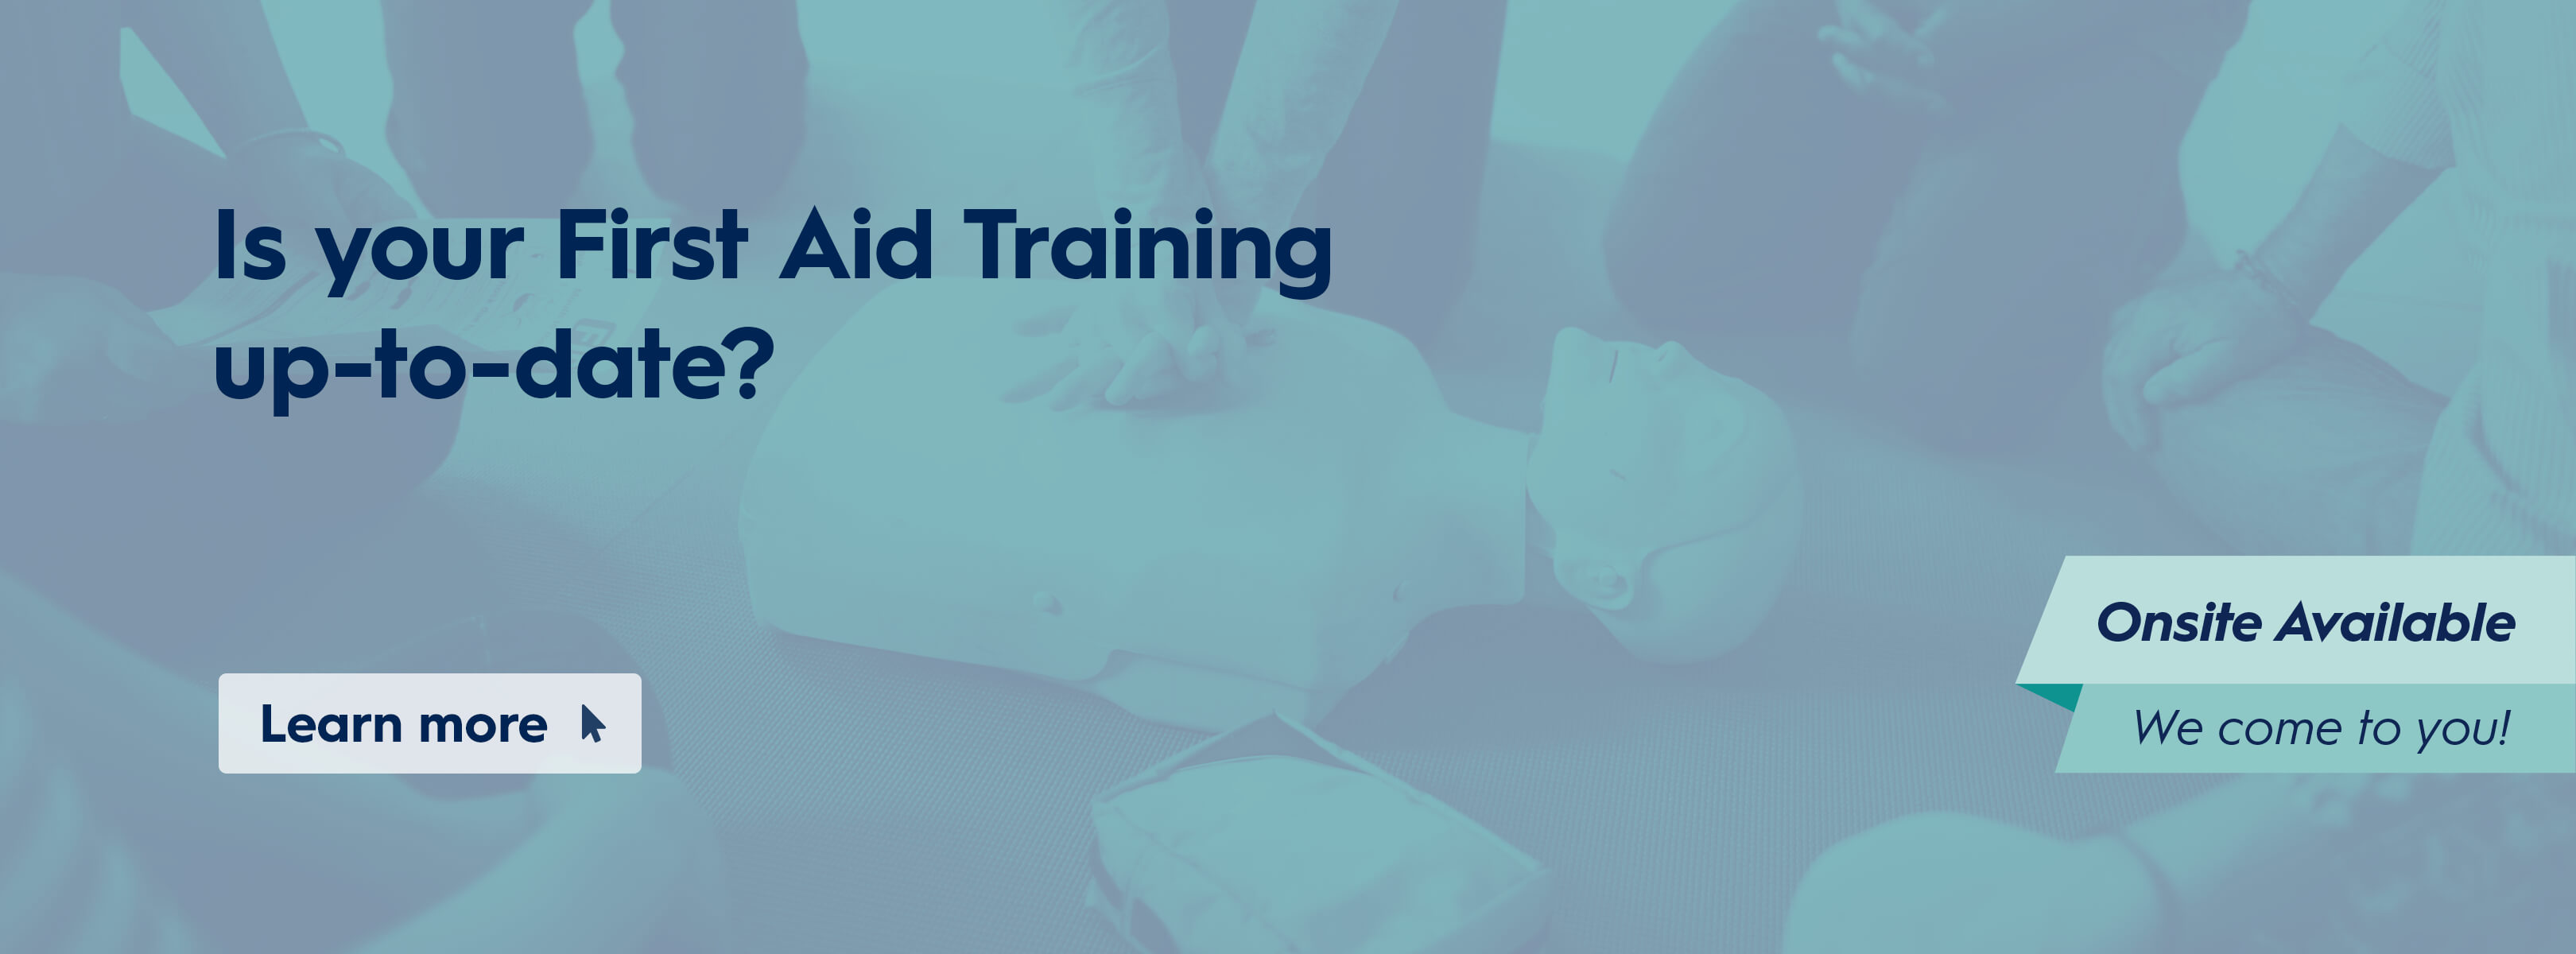 Is your first aid training up-to-date?